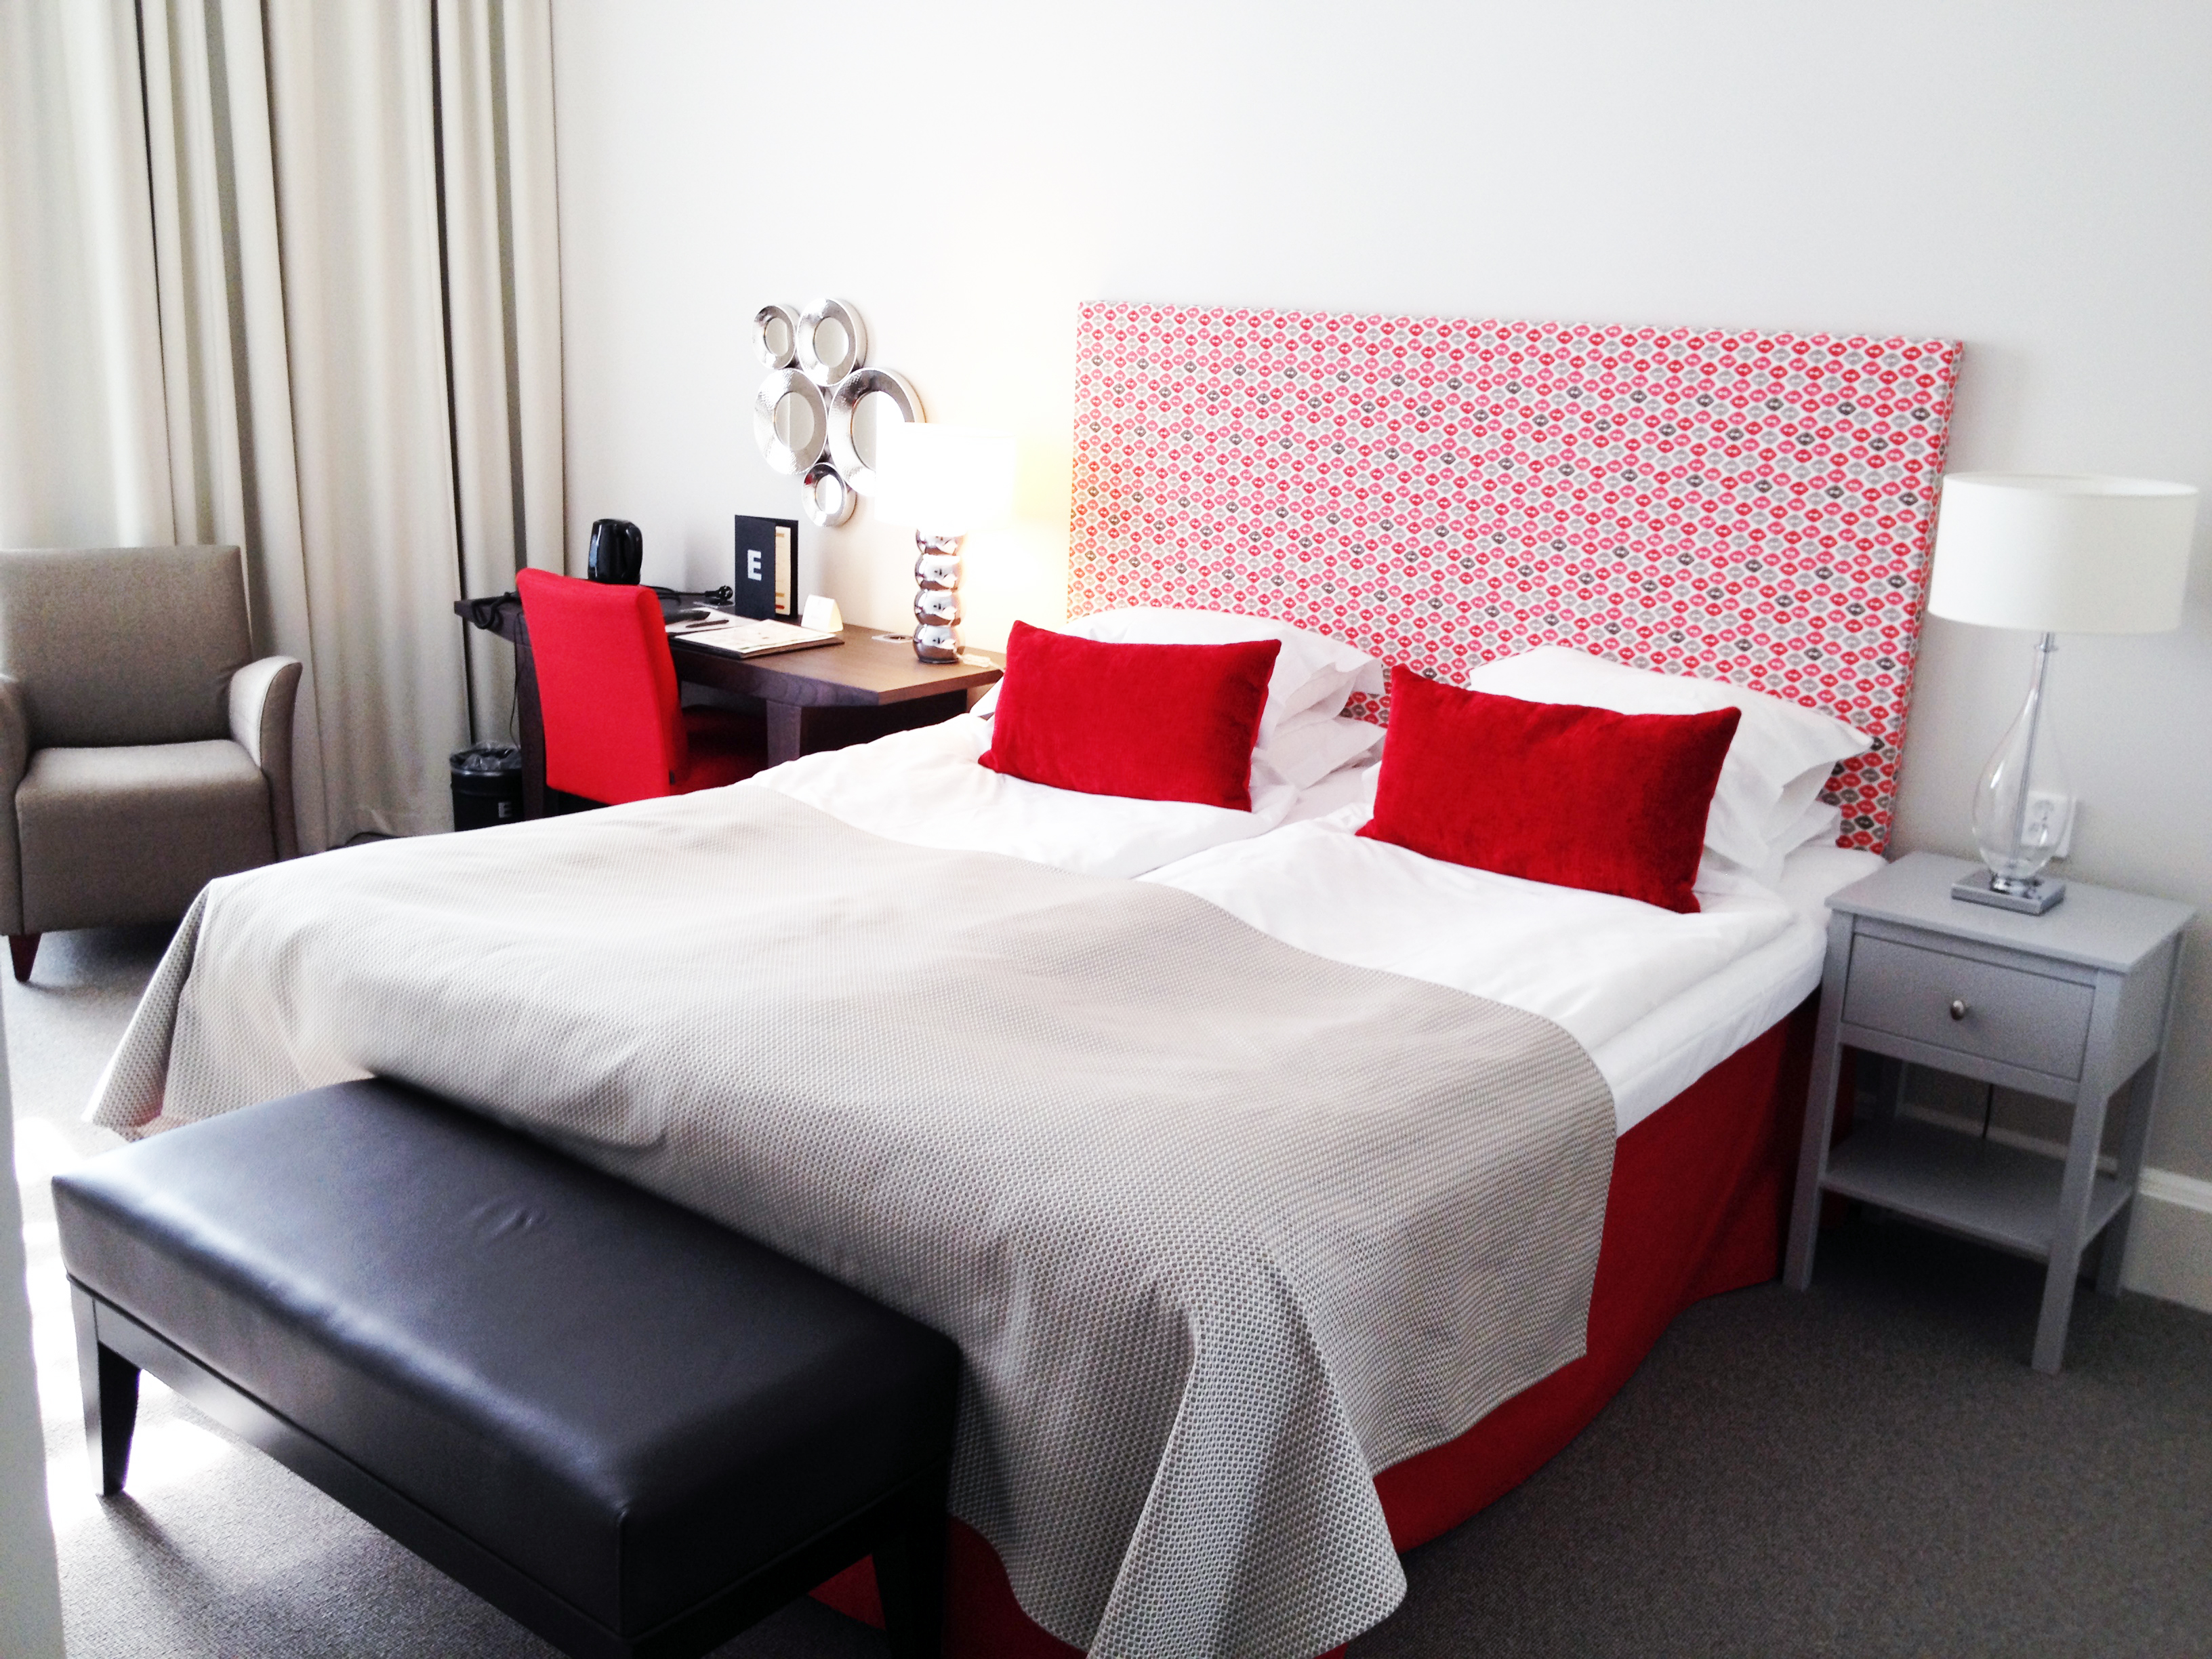 Hotel room with double bed, red headboard and desk